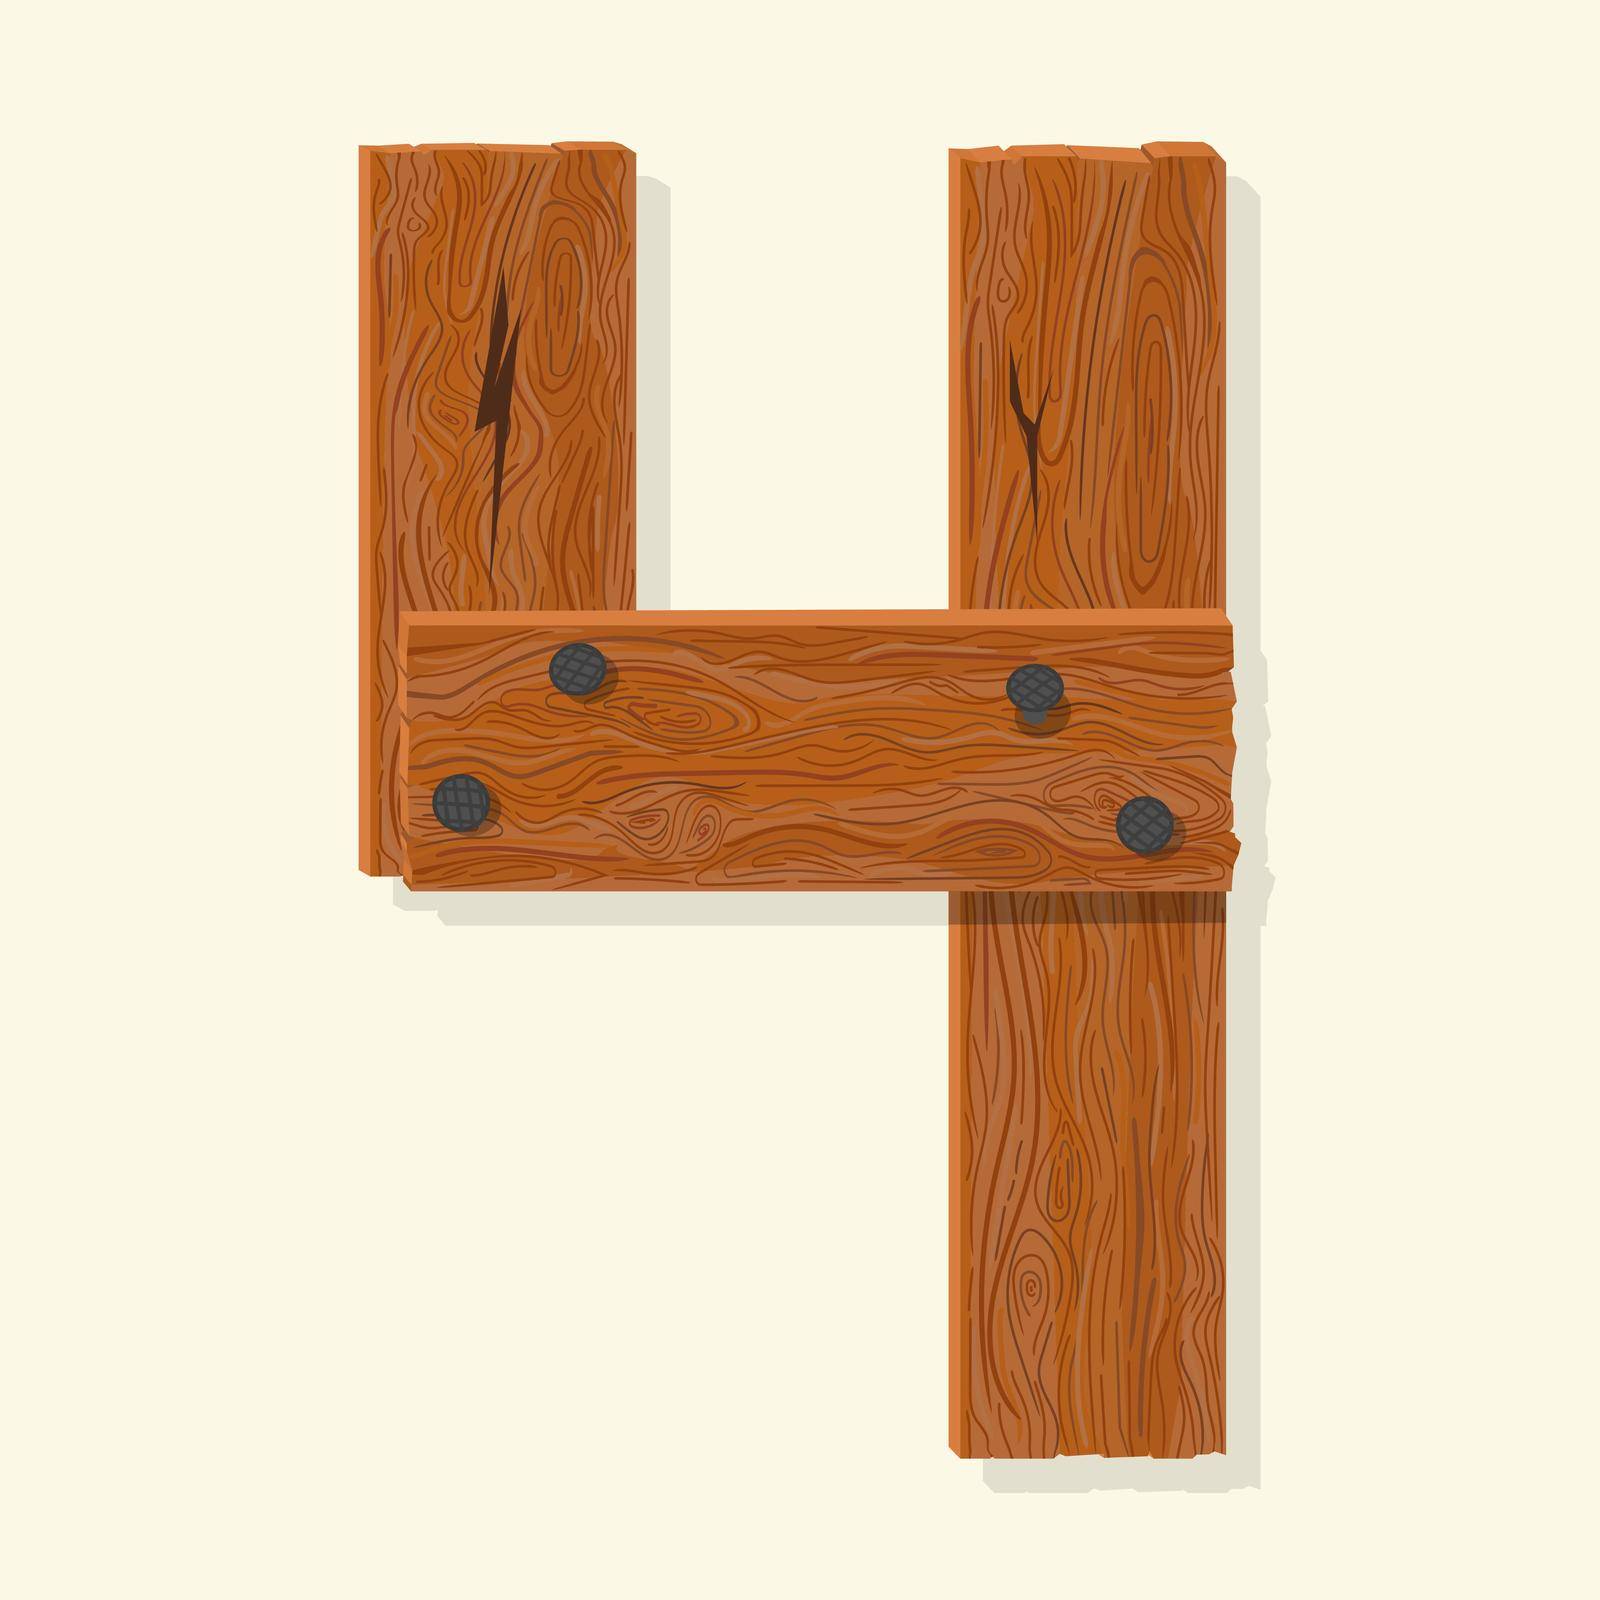 Wood number four, wooden plank numeric digit font made from planks held with nails. Textured brown oak character. Vector